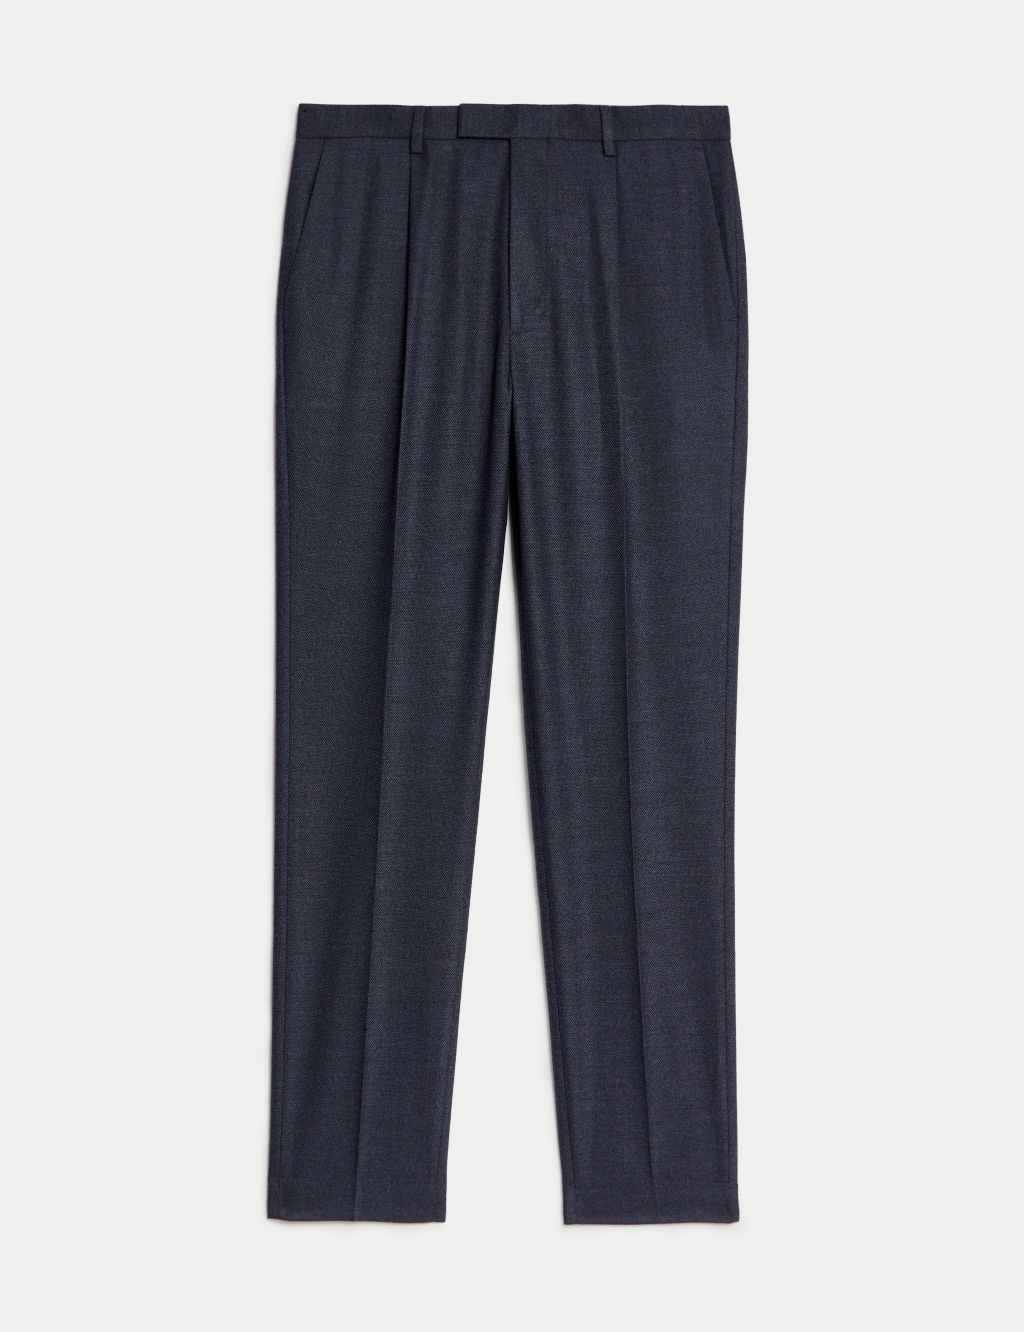 Textured Stretch Trousers image 7